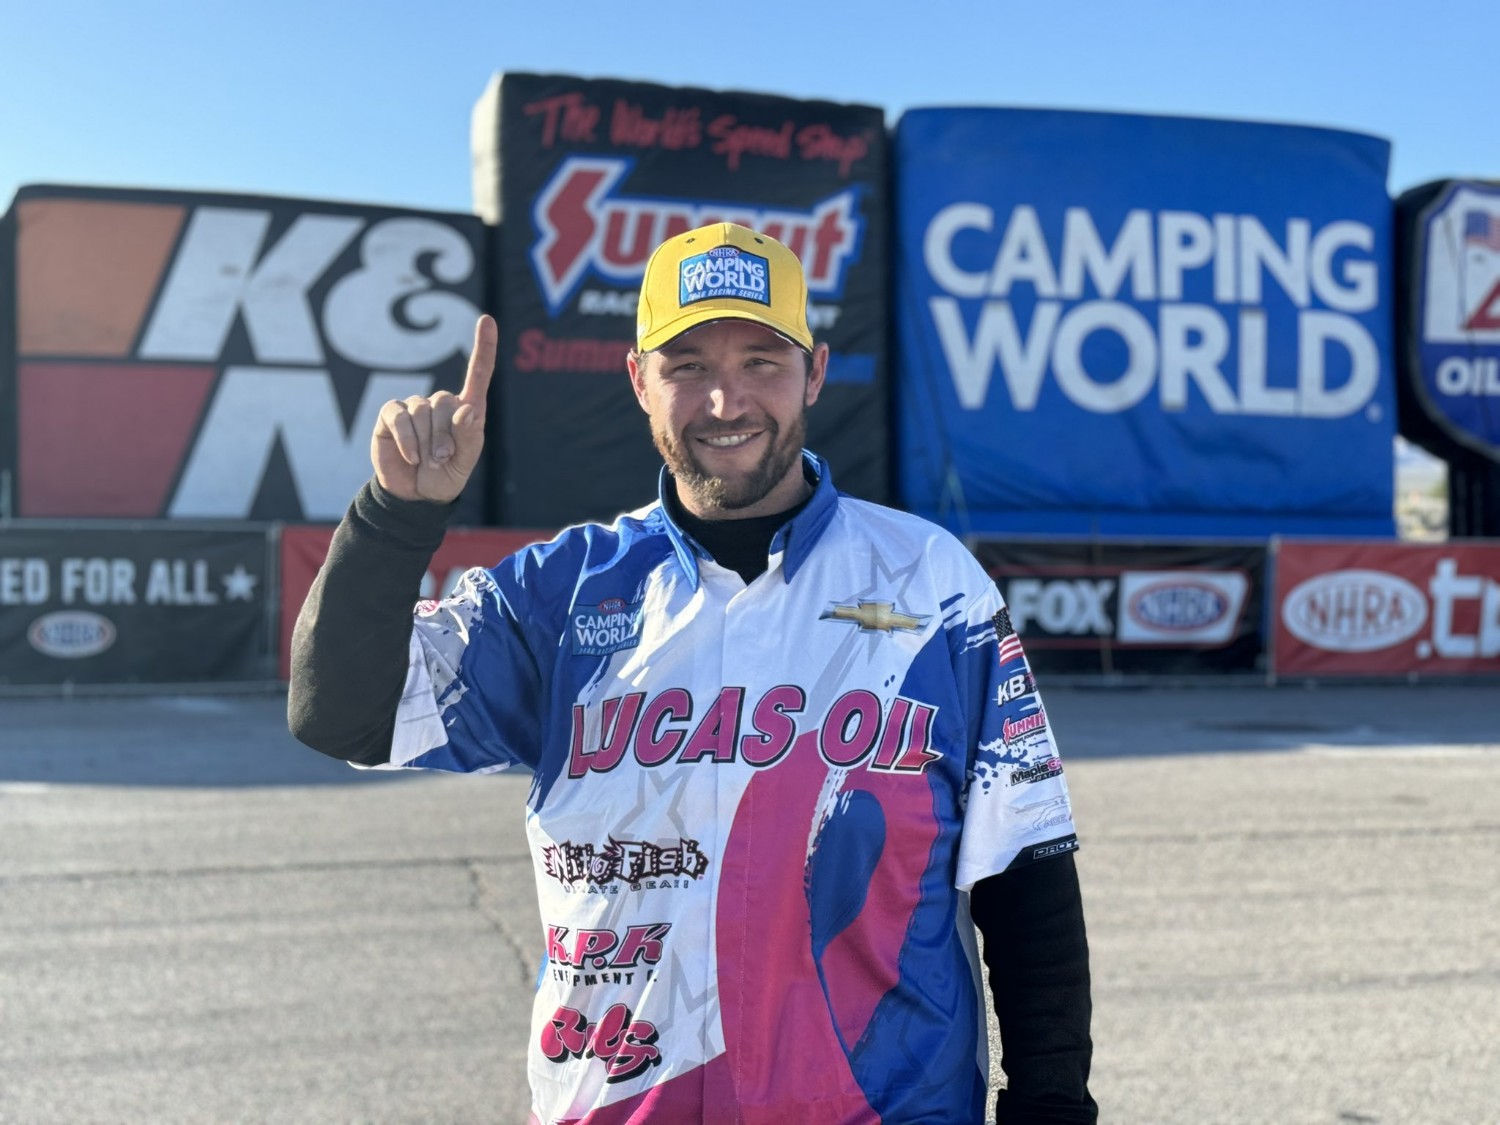 Kyle Koretsky qualifies #1 in the Pro Stock Class at the NHRA Nevada Nationals